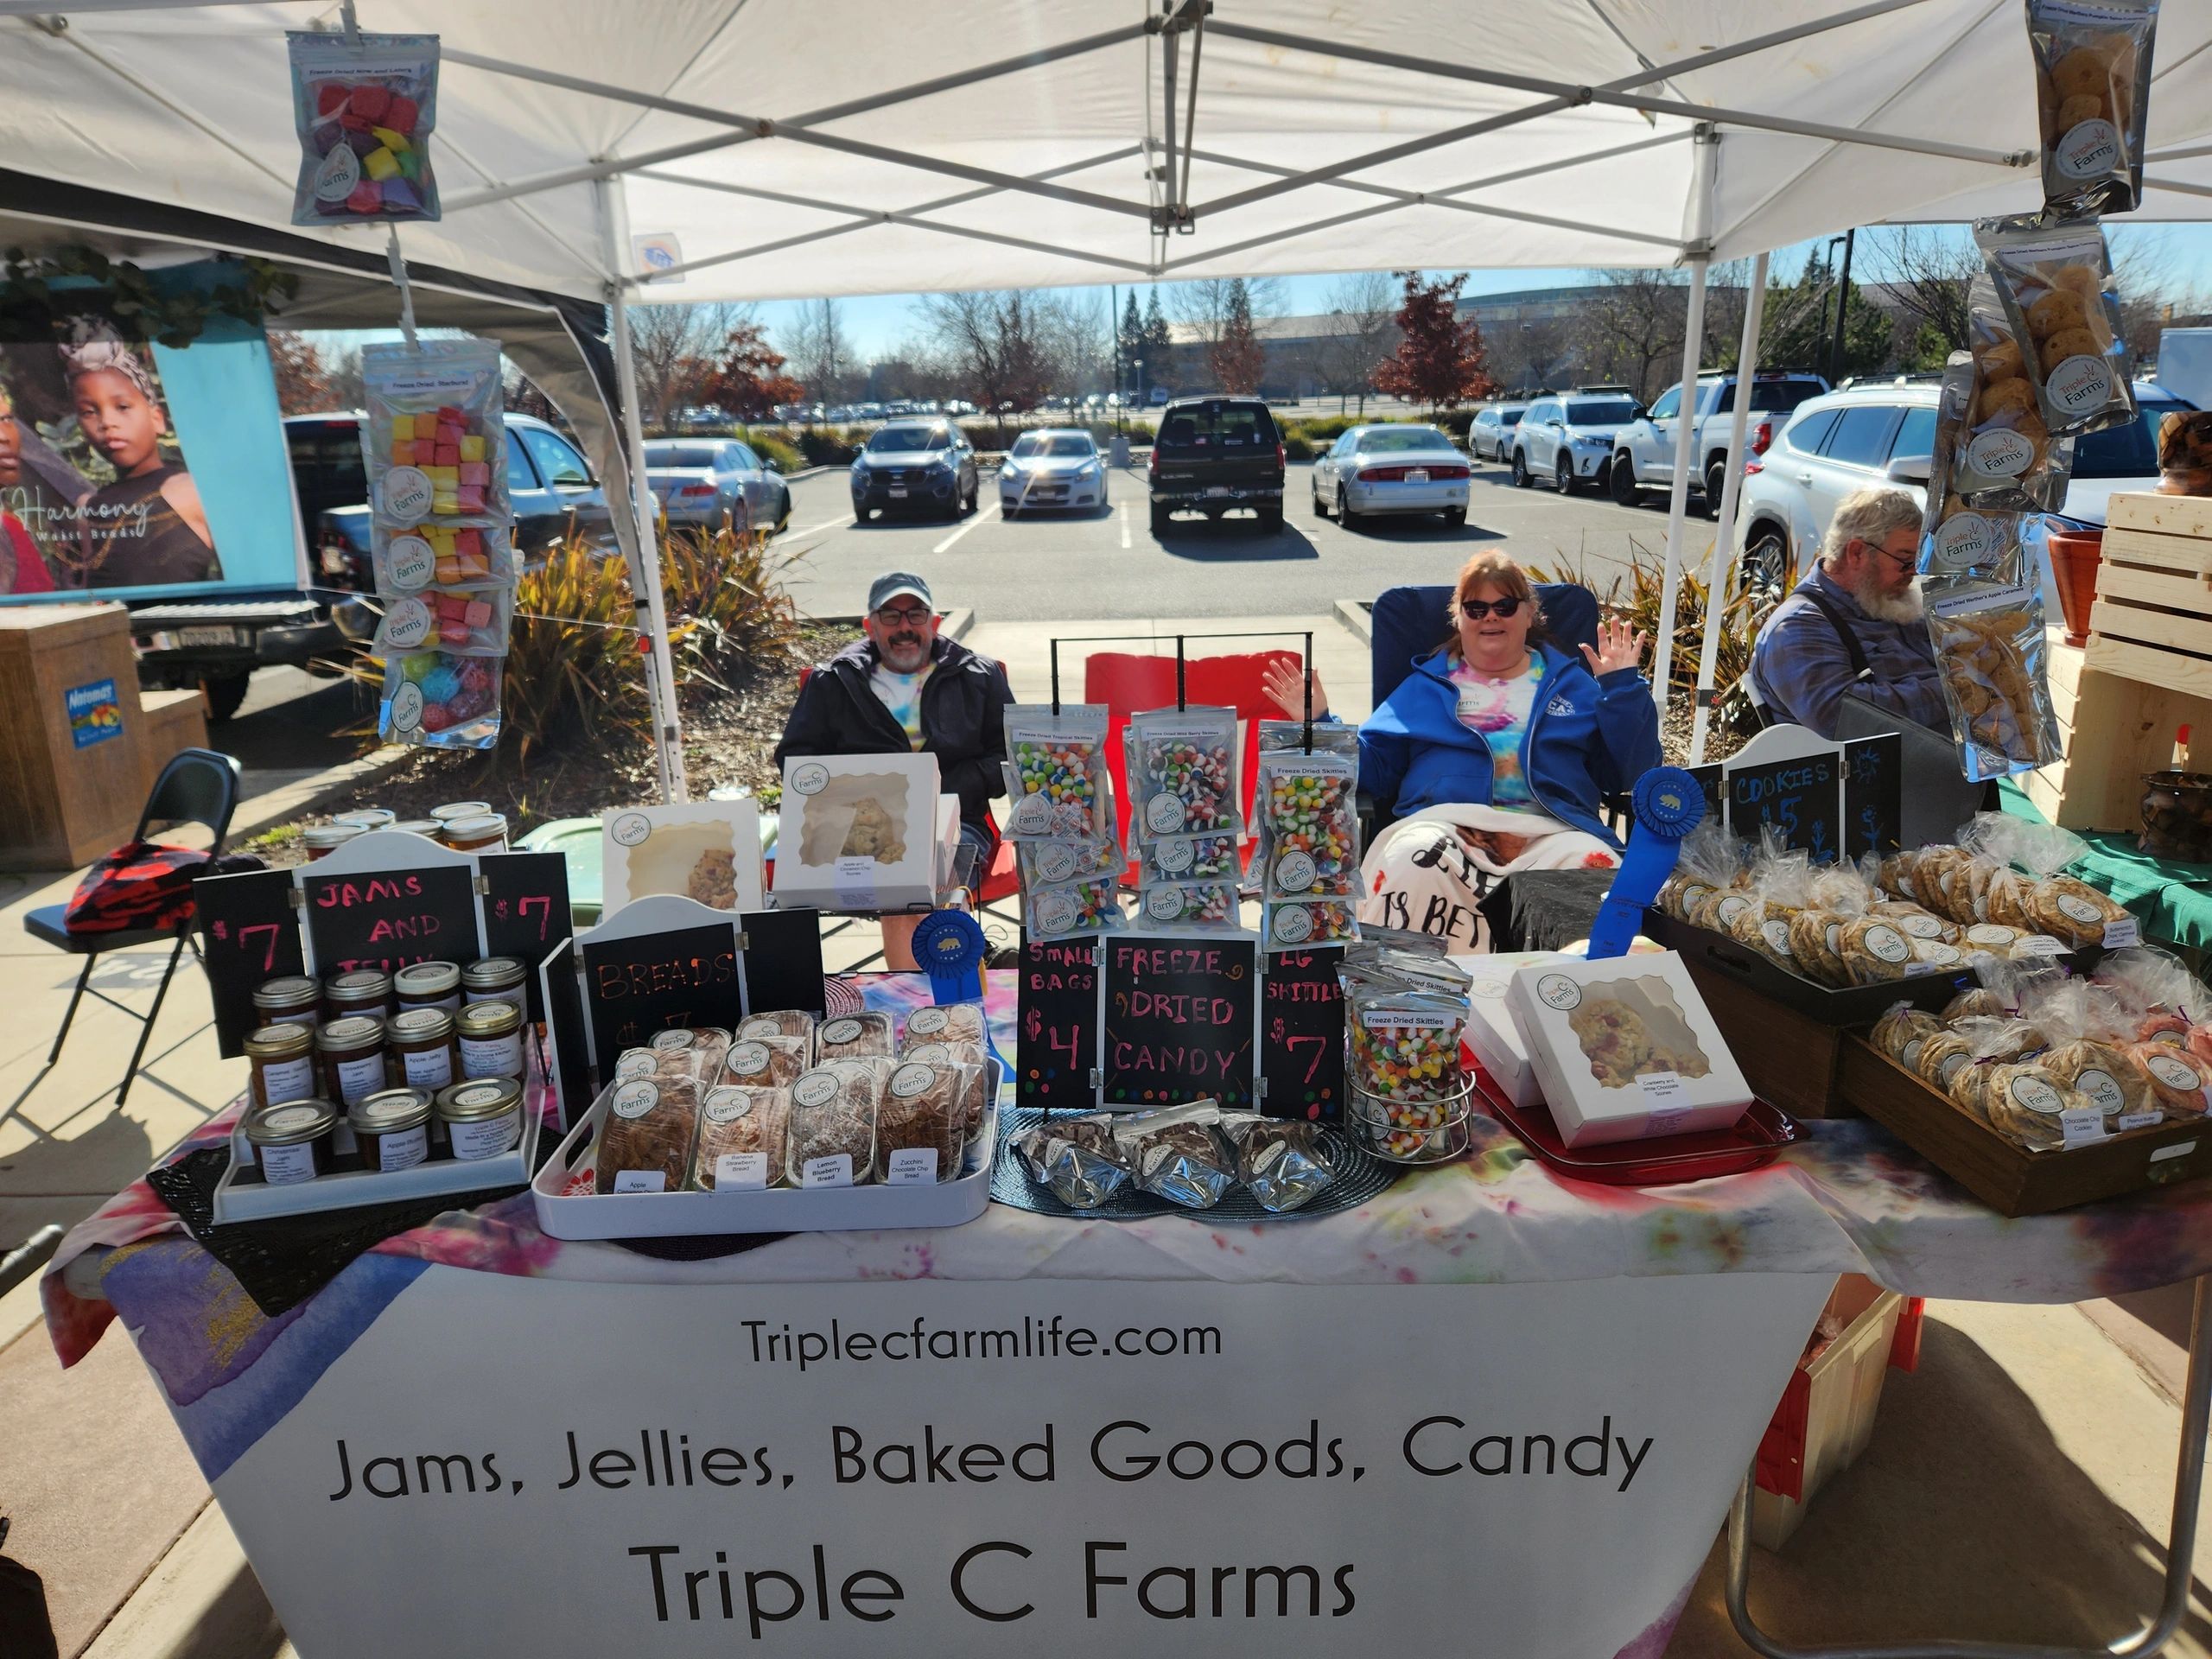 Triple C Farms sells fresh baked goods, jams, jellies,candies and freeze dried treats. Since 2020